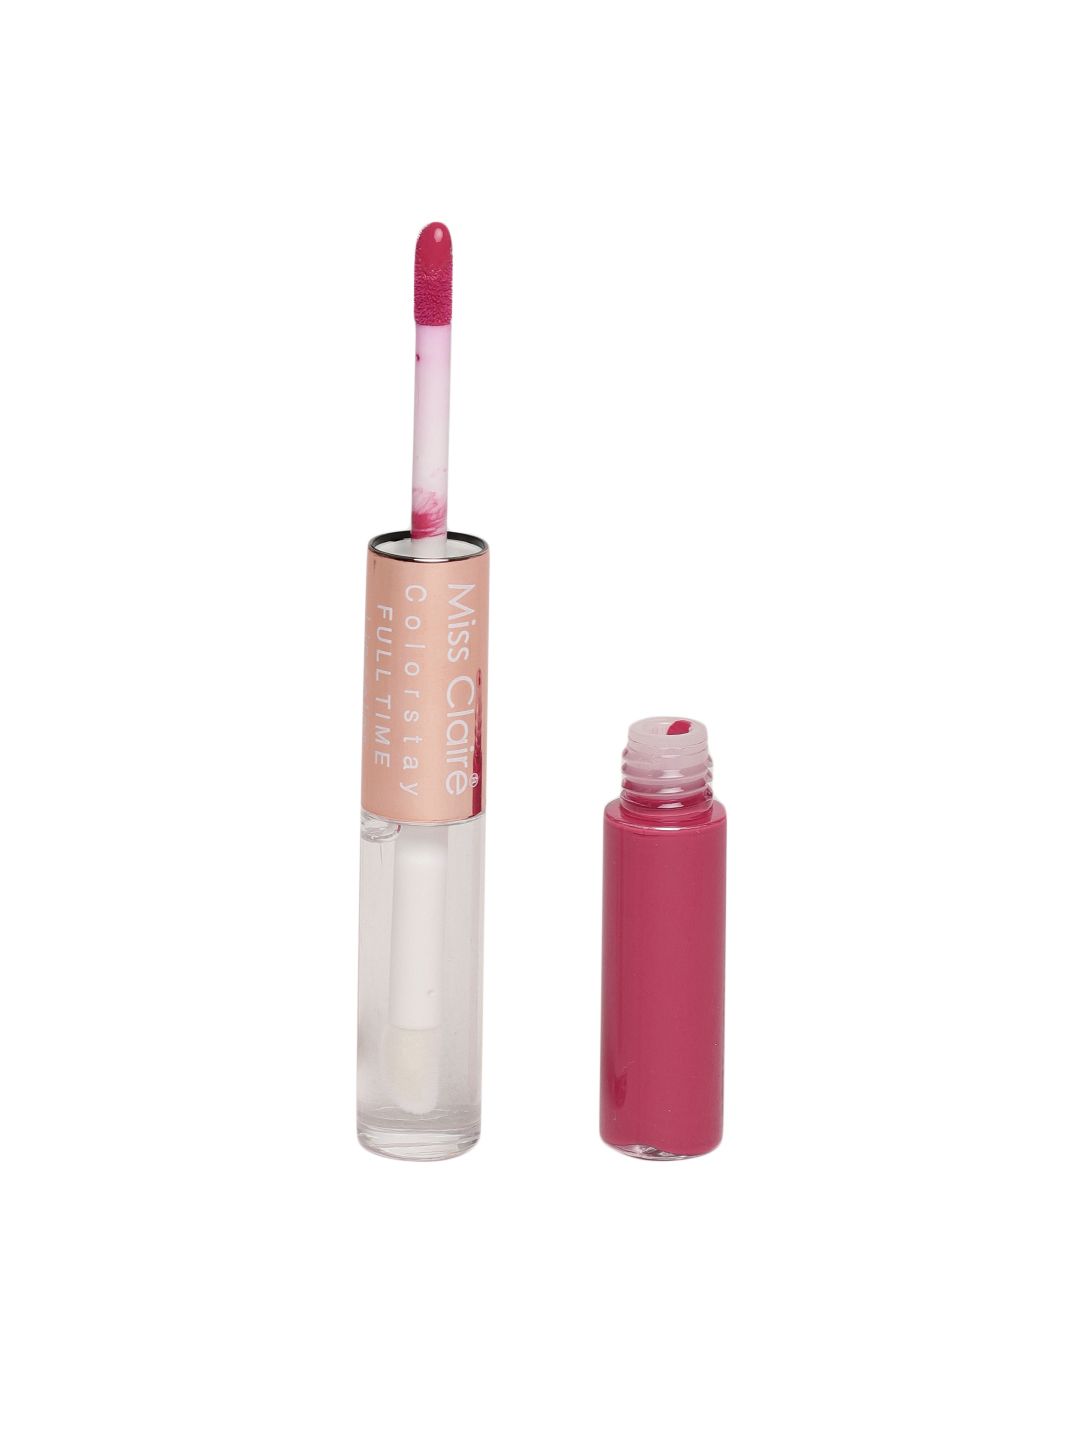 Miss Claire 39 Waterproof Perfection Lip Color 10ml Price in India